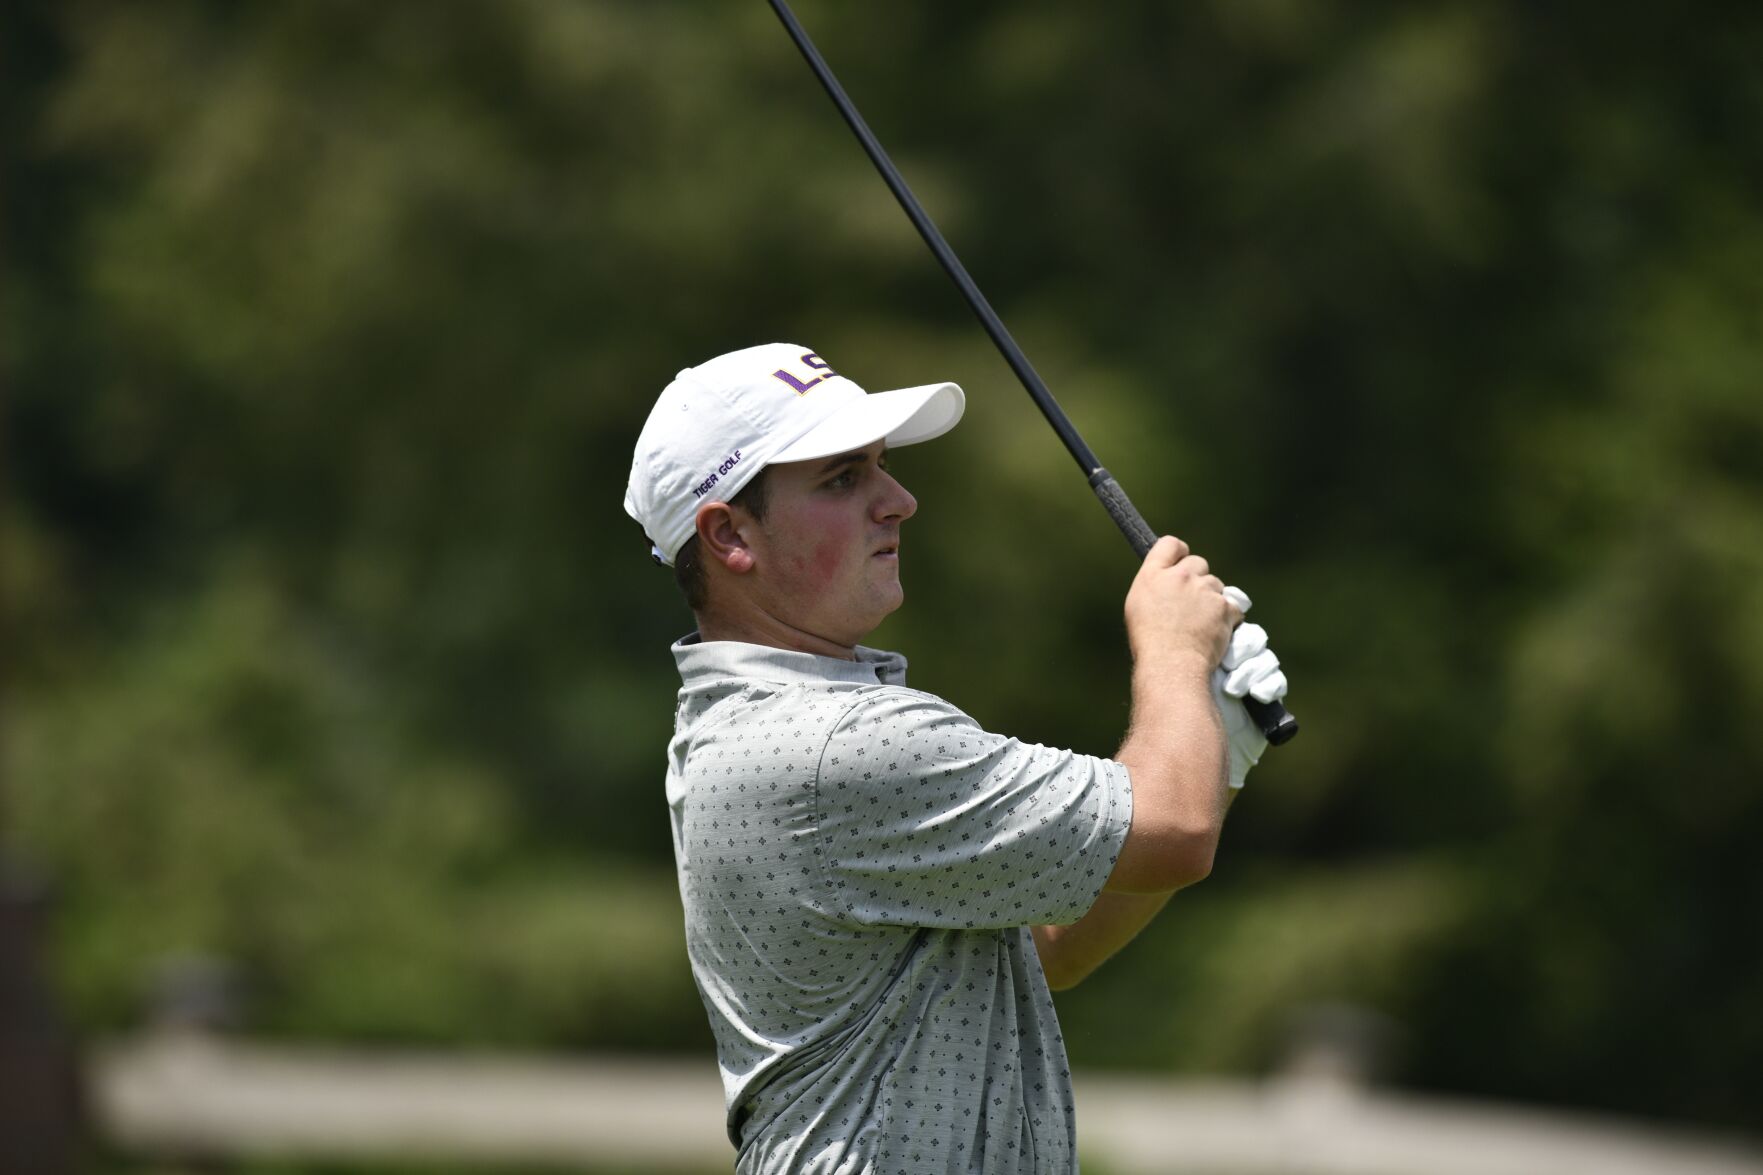 PHOTO GALLERY Louisiana State golfer shoots 7-under on back nine to move into contention Sports tribdem